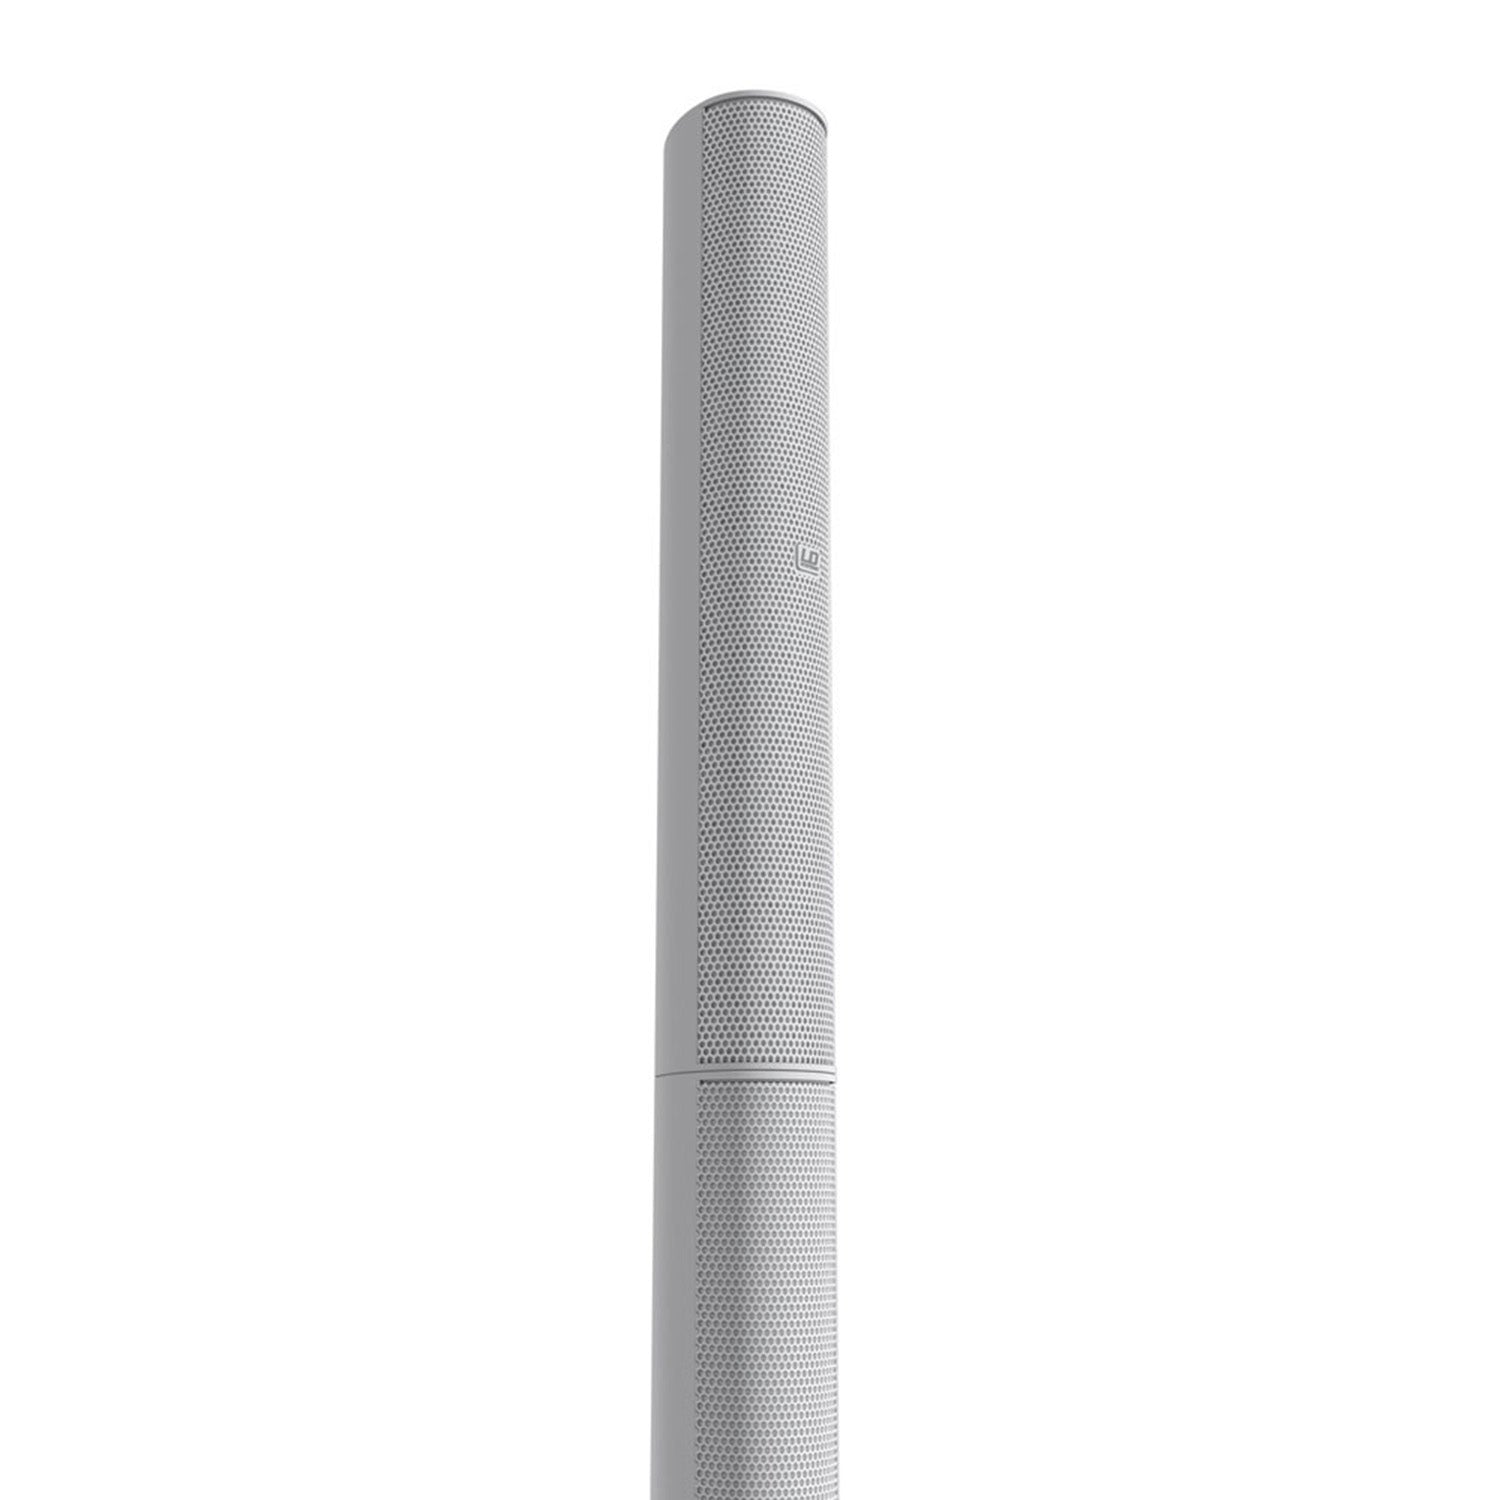 B-Stock: LD System MAUI 5 GO W, Ultra Portable Battery Operated Column PA System - White - Hollywood DJ